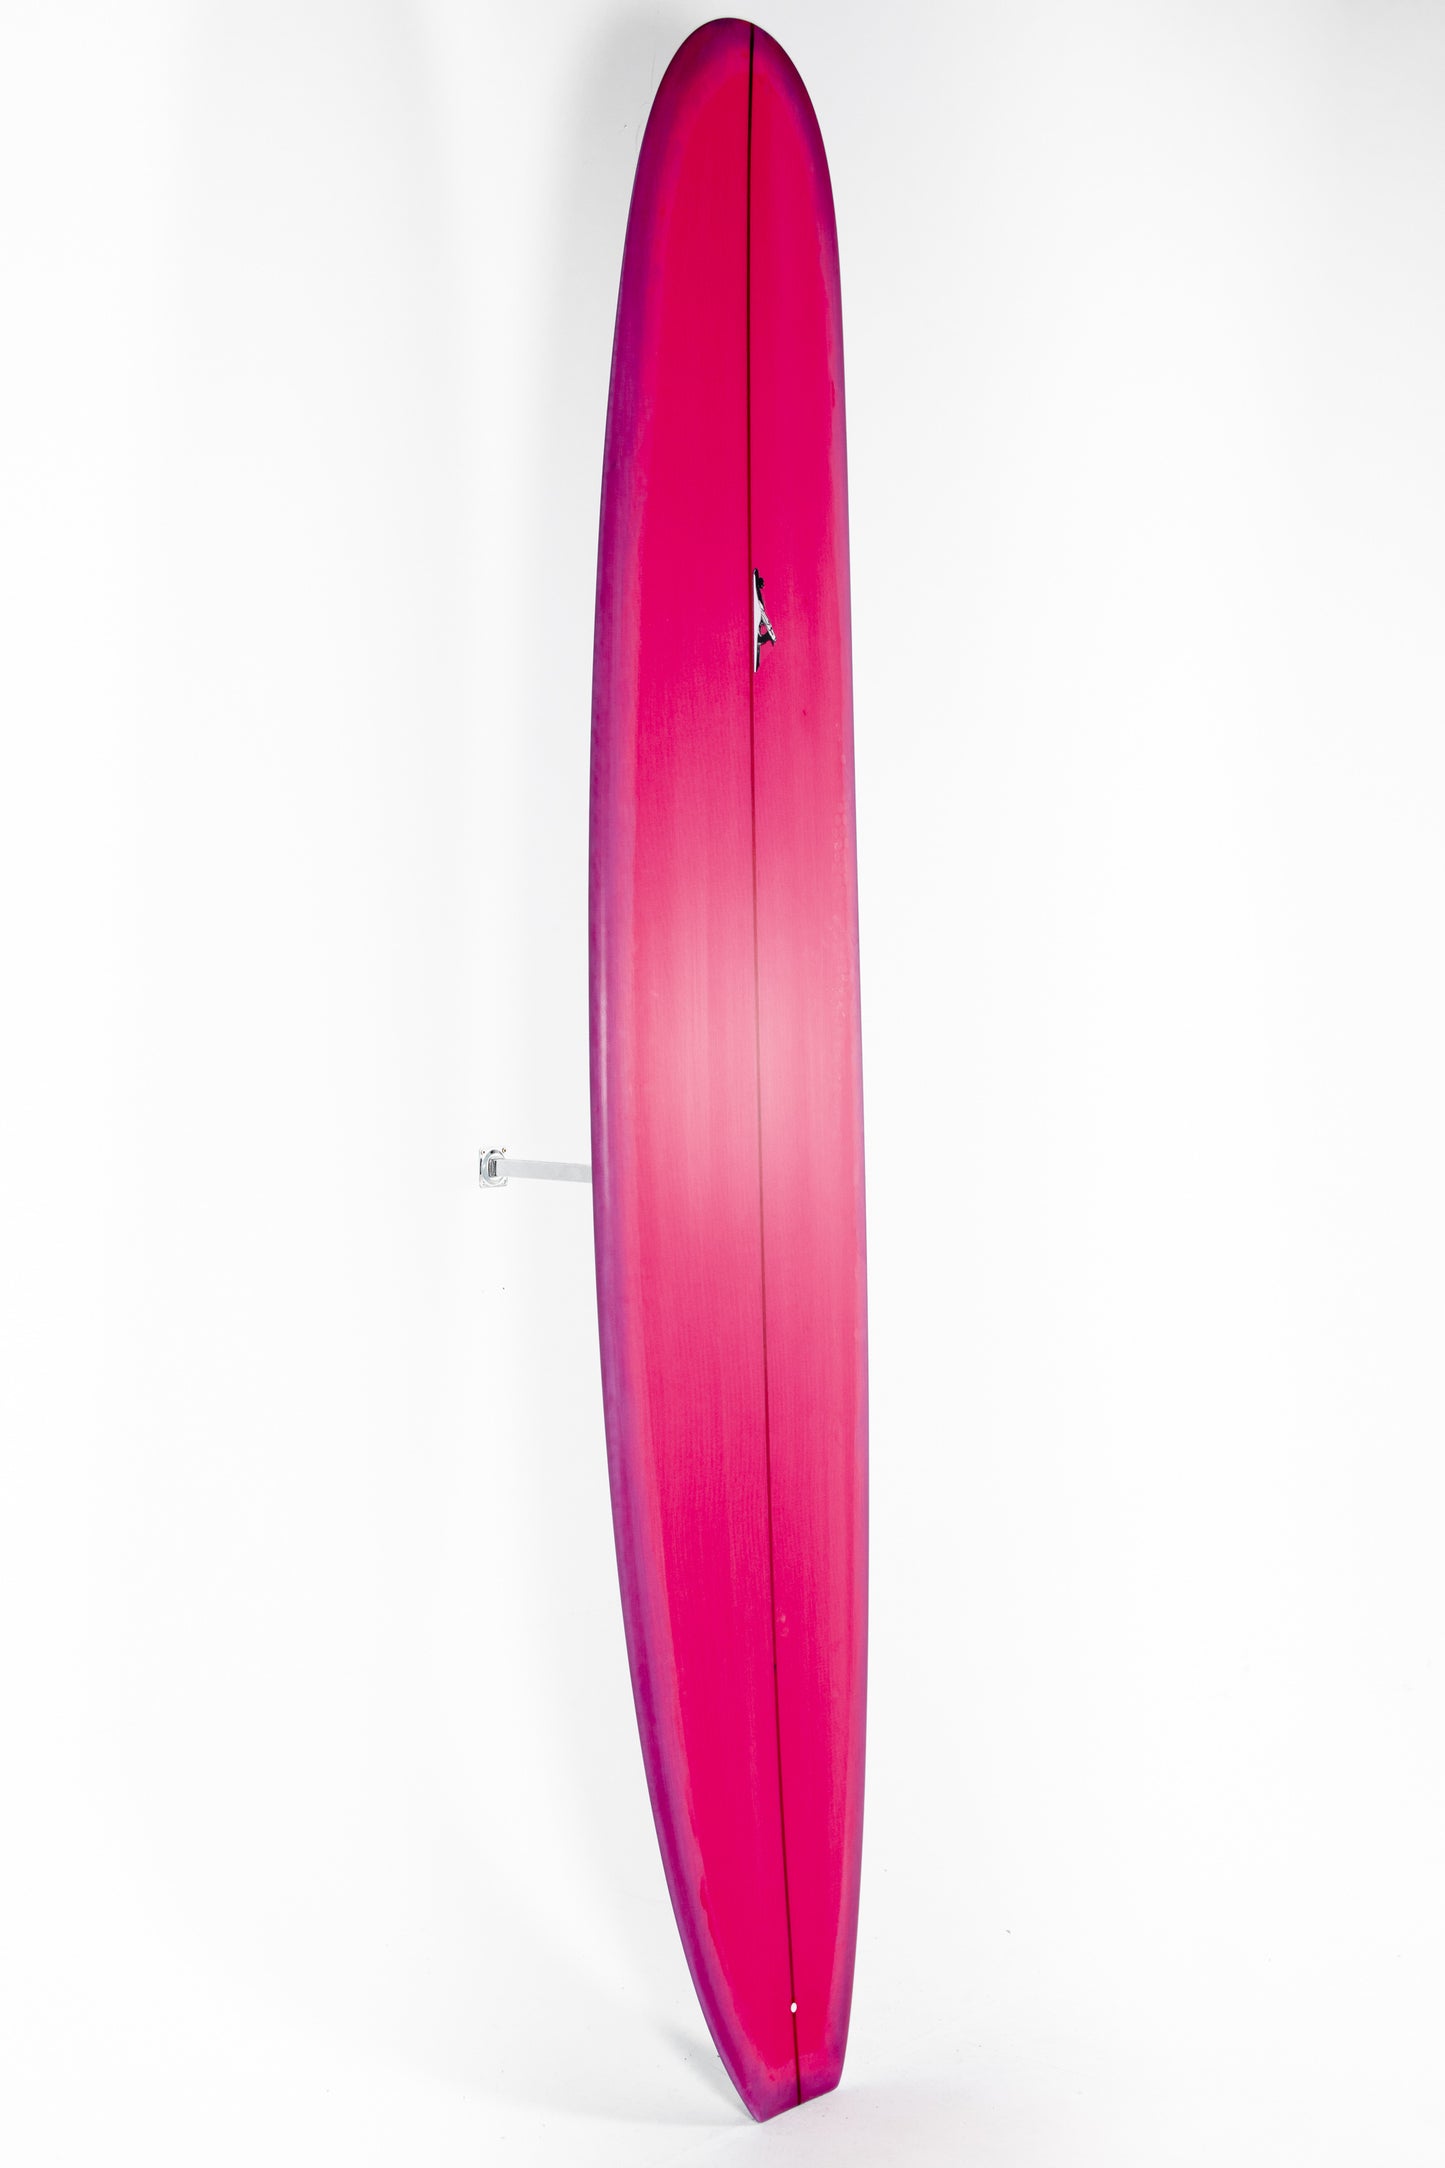 
                  
                    Pukas Surf Shop_Thomas Surfboards - SCOOP TAIL NOSERIDER - 9'4" x 22 15/16 x 2 15 /16 x 72.3L - SCOOP94
                  
                